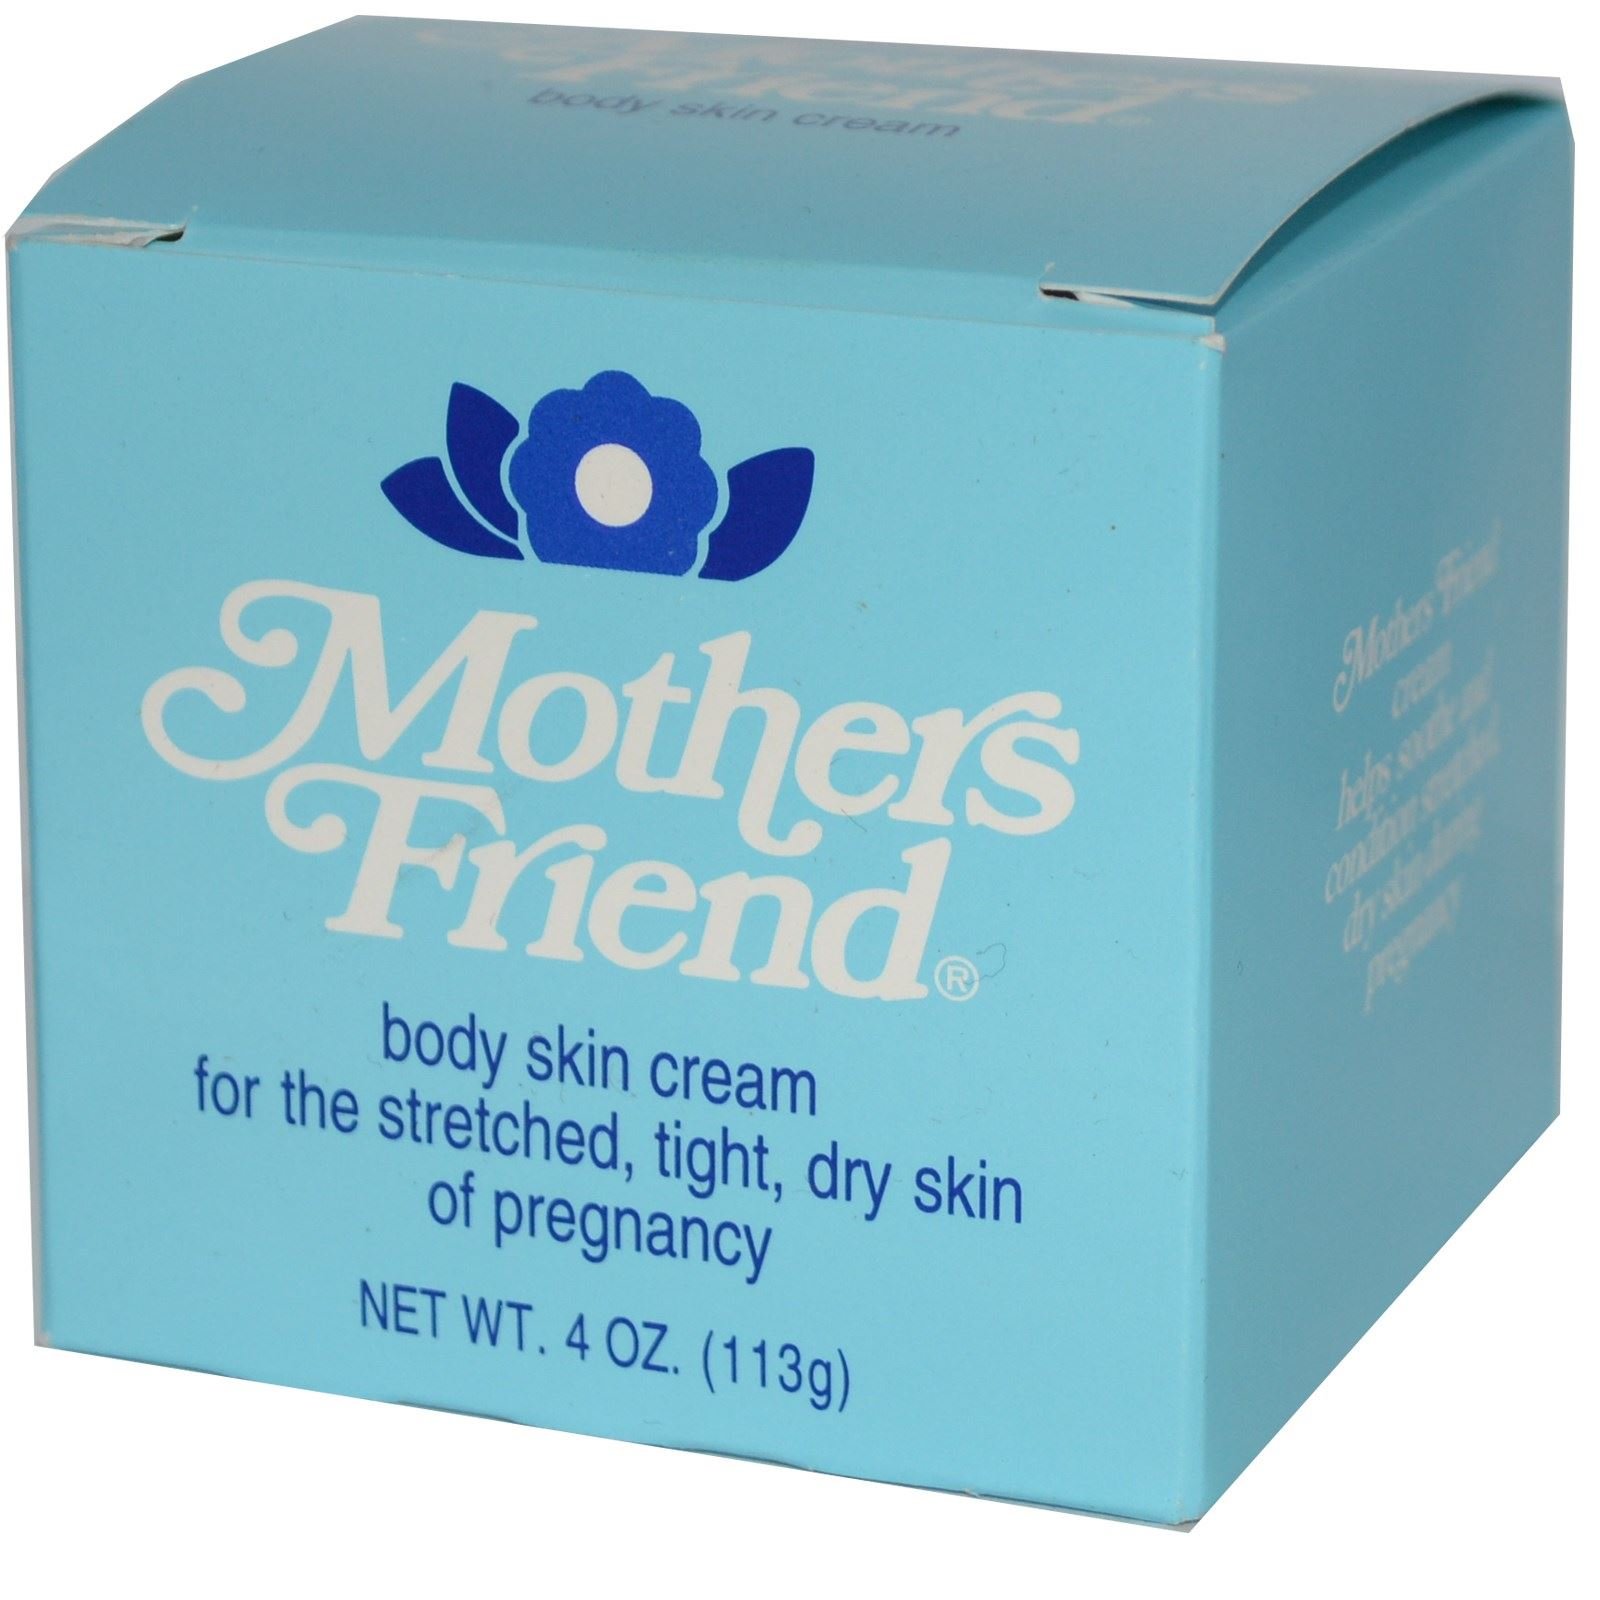 1 Pack of Mothers Friend Body and Skin Cream, for Stretched Tight and Dry Skin of Pregnancy